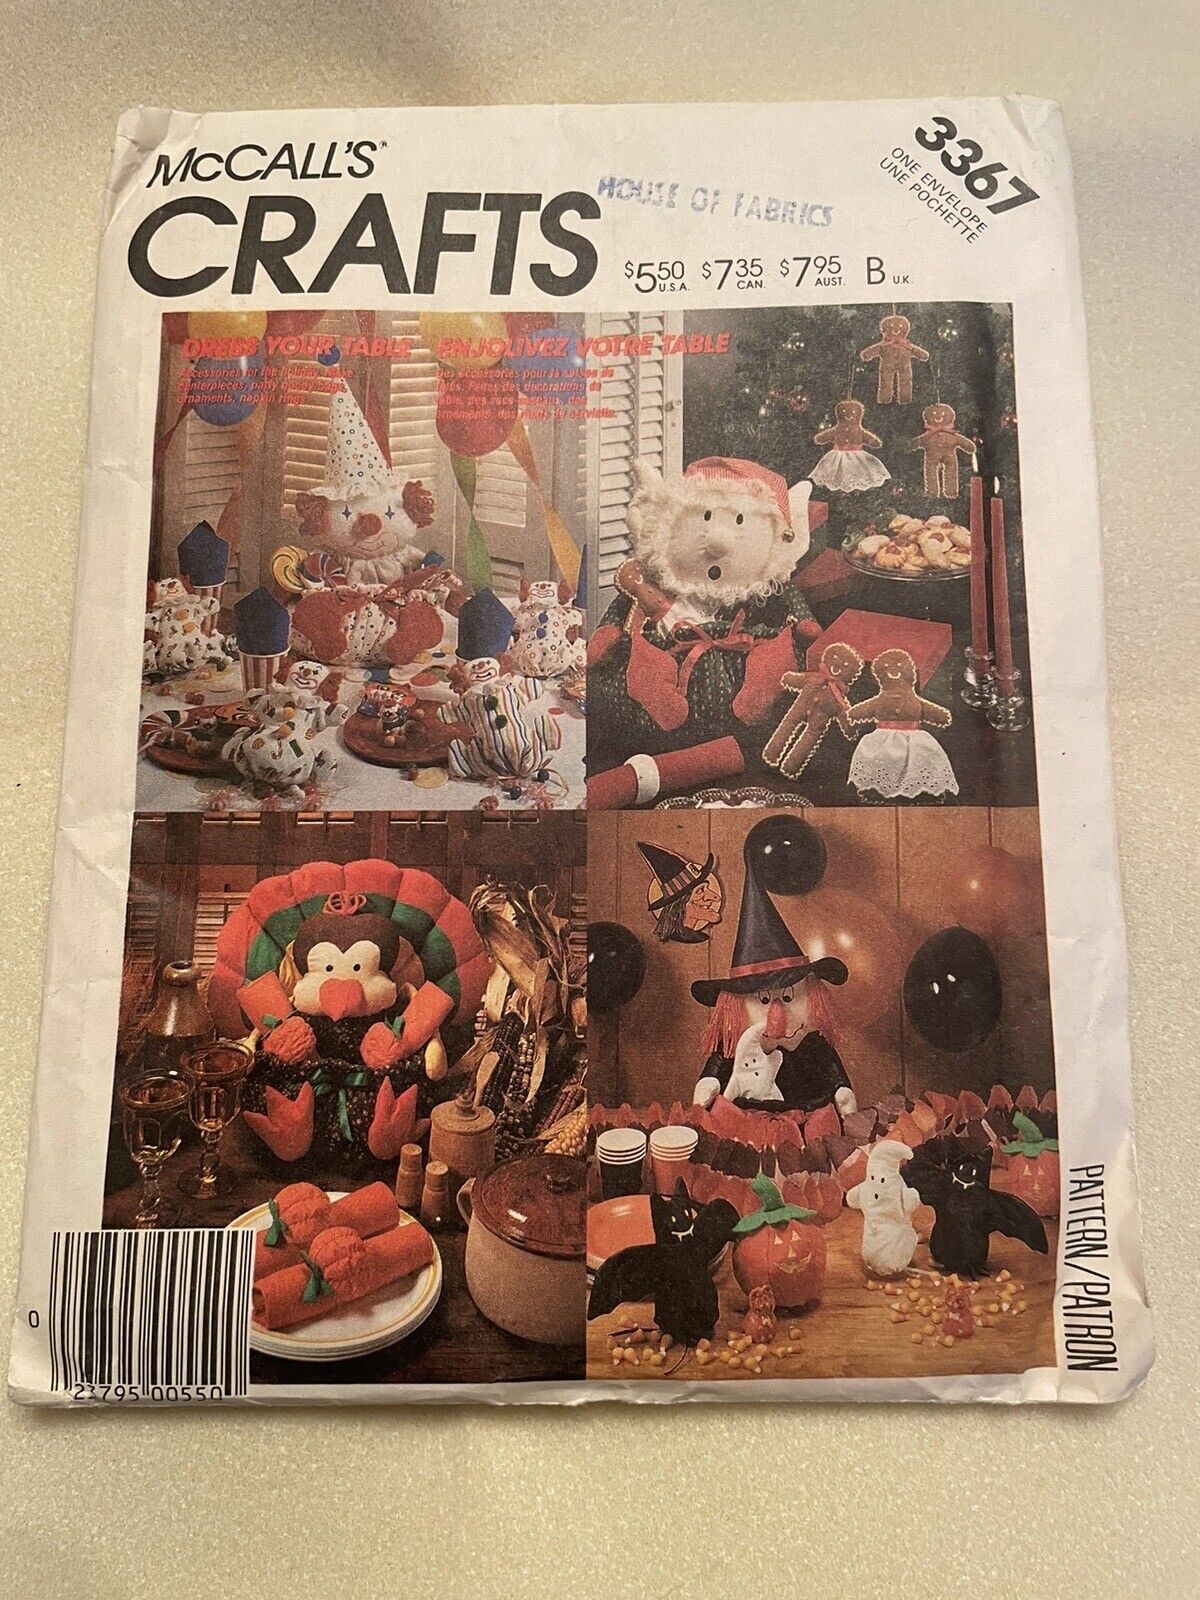 Vintage McCalls craft pattern, nos, table settings